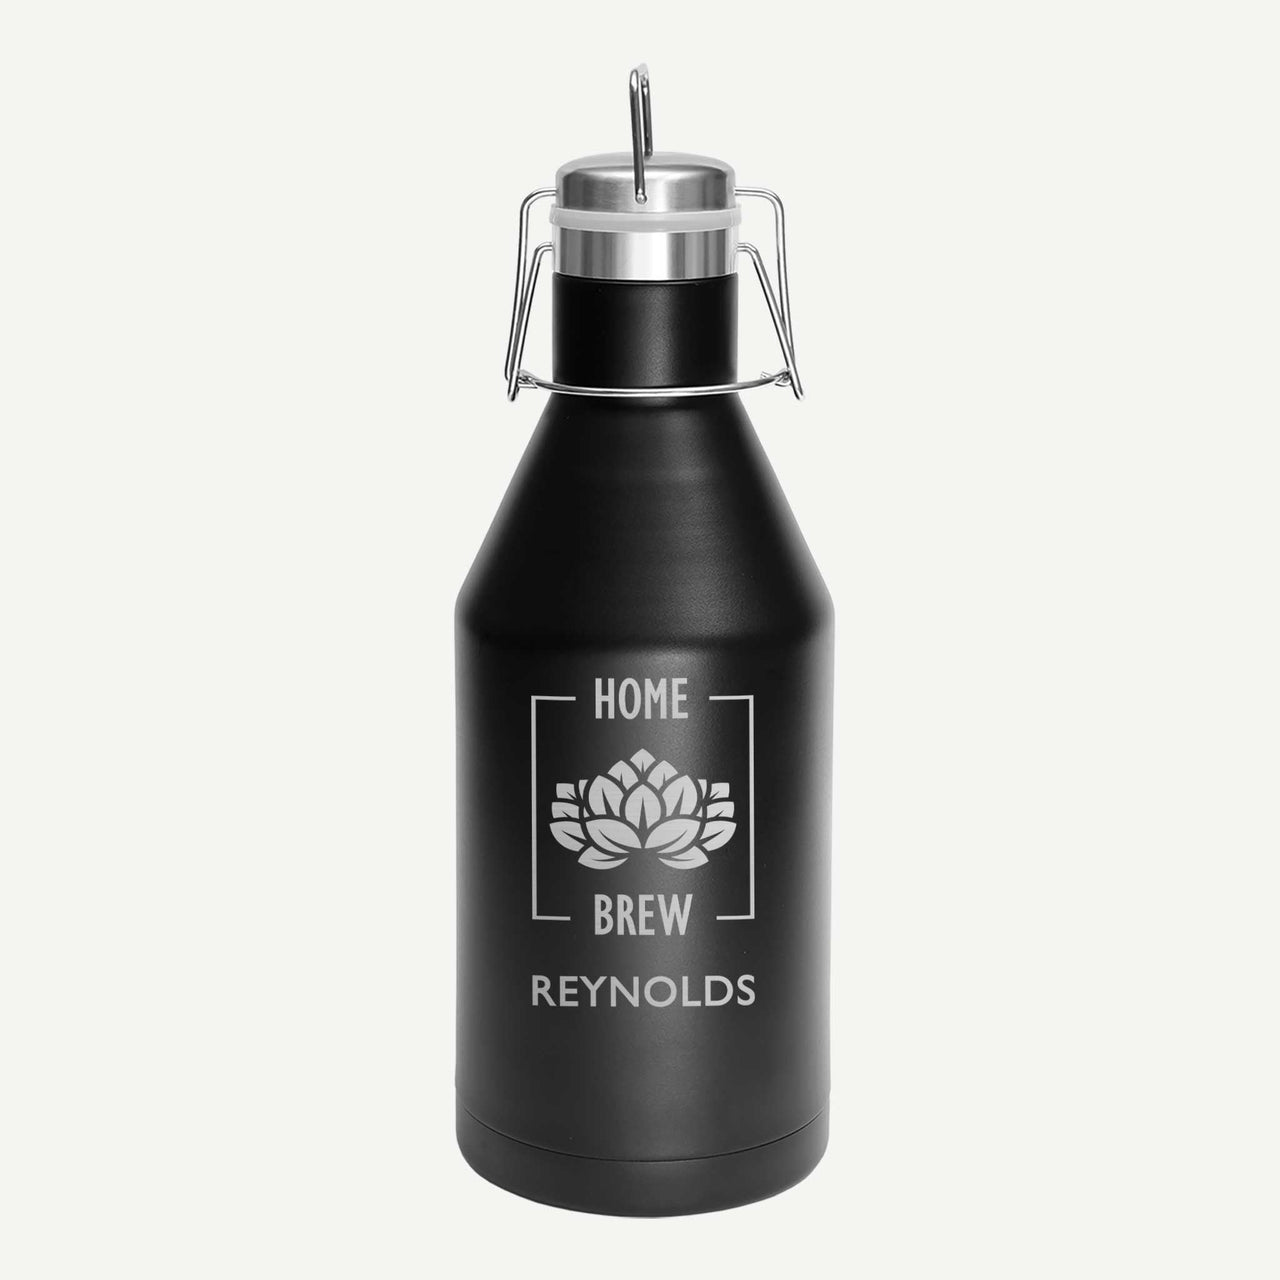 Personalized Steel Beer Growler - Home Brew - Mod Peach